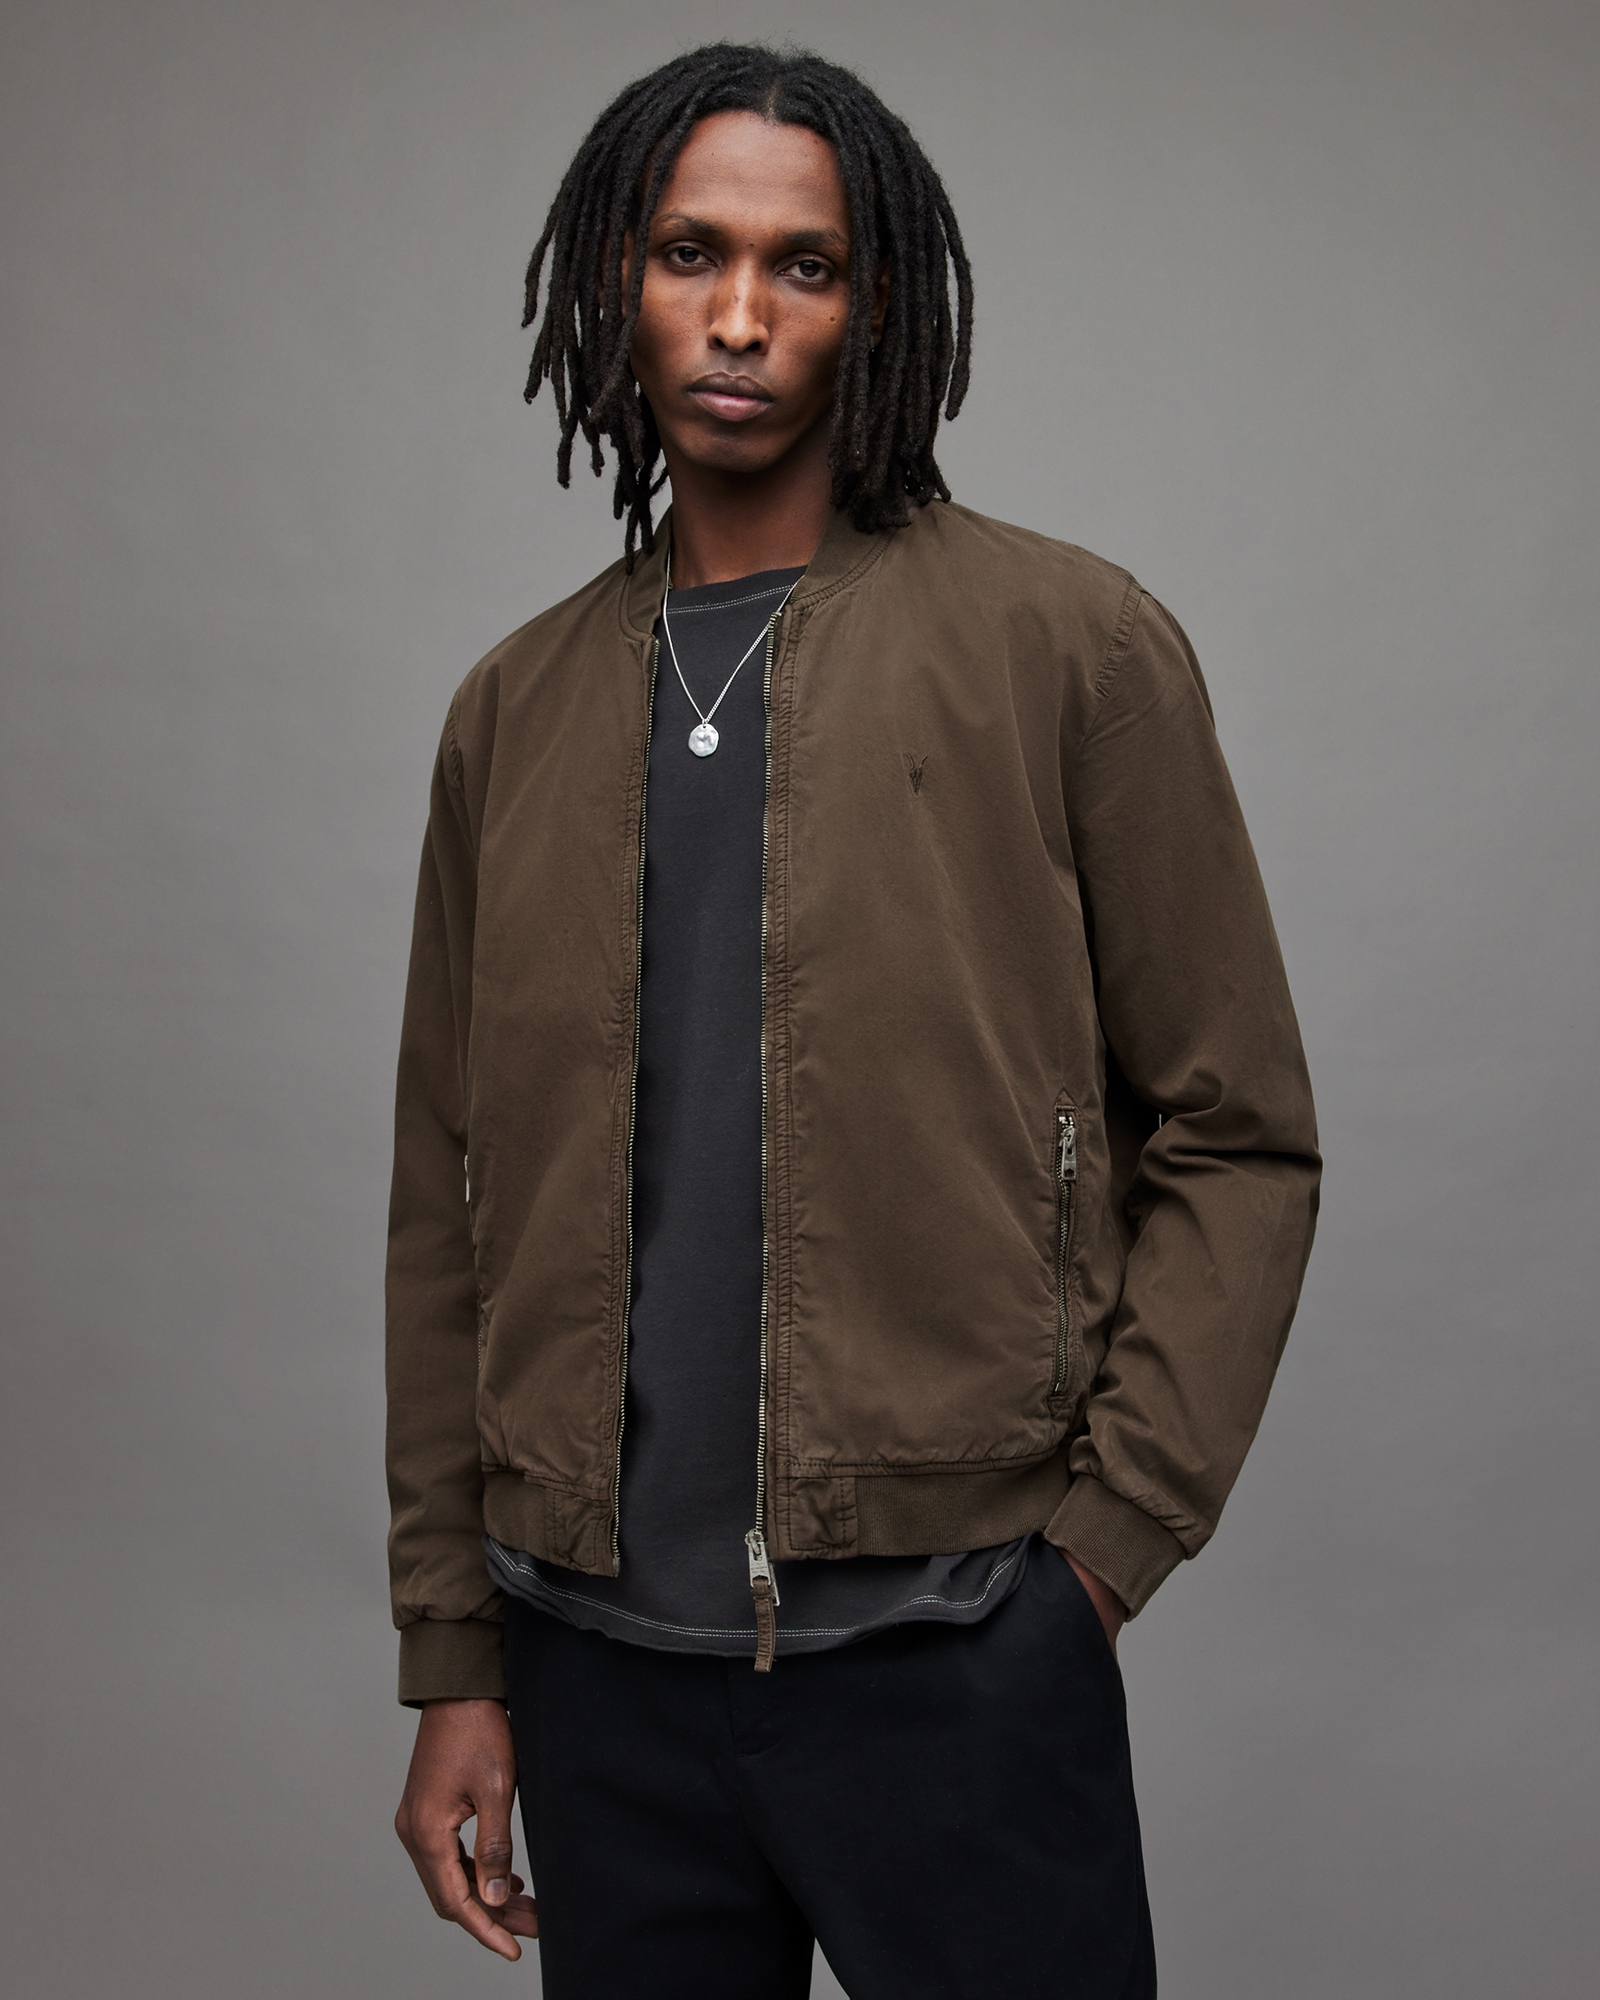 Lows Bomber Jacket Chocolate Brown | ALLSAINTS US